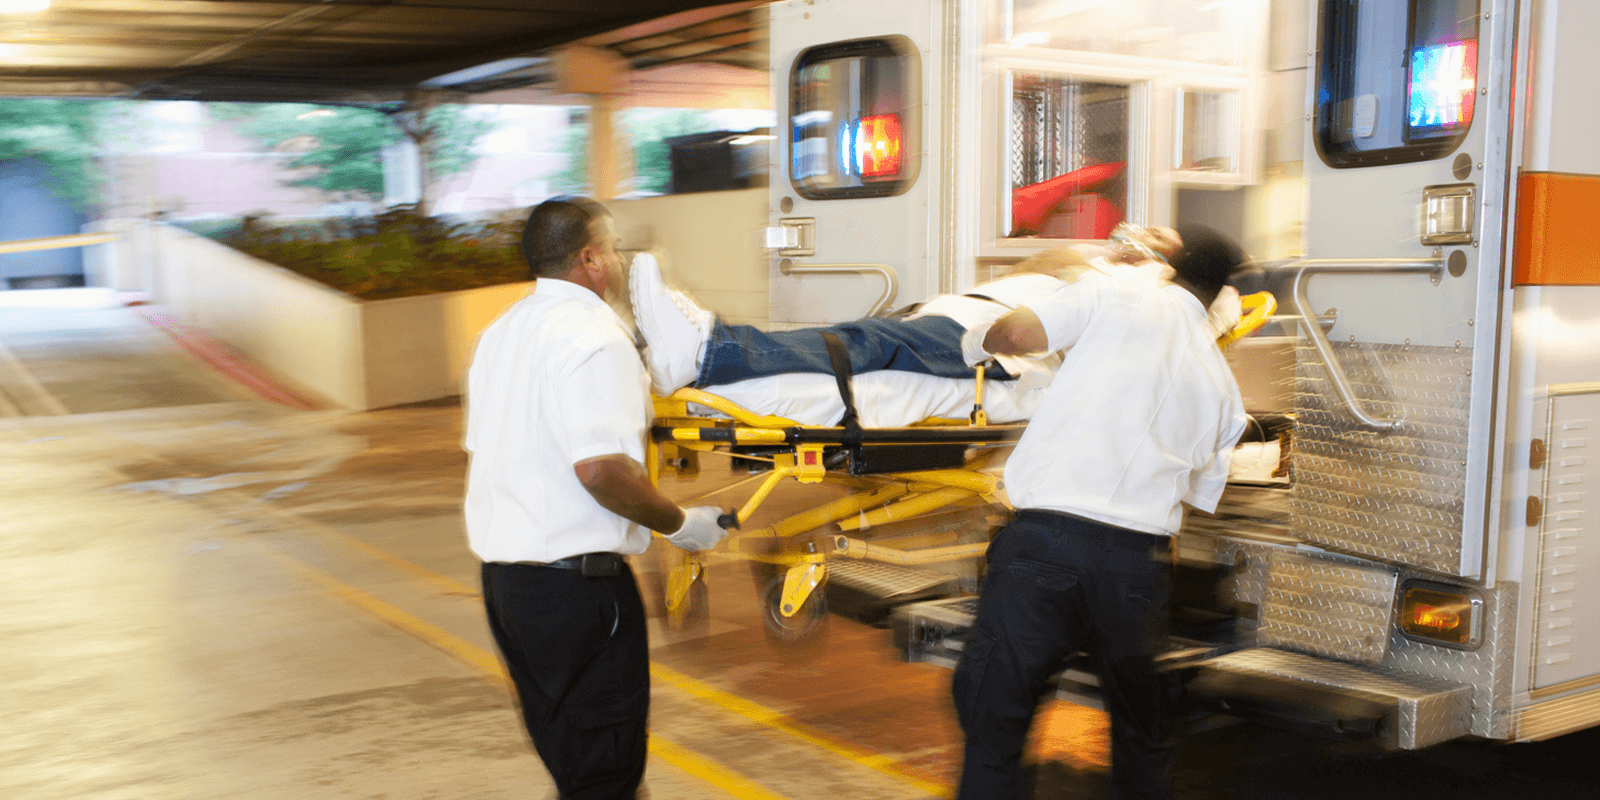 All EMS Workers Should be Eligible for Federal Benefits Program